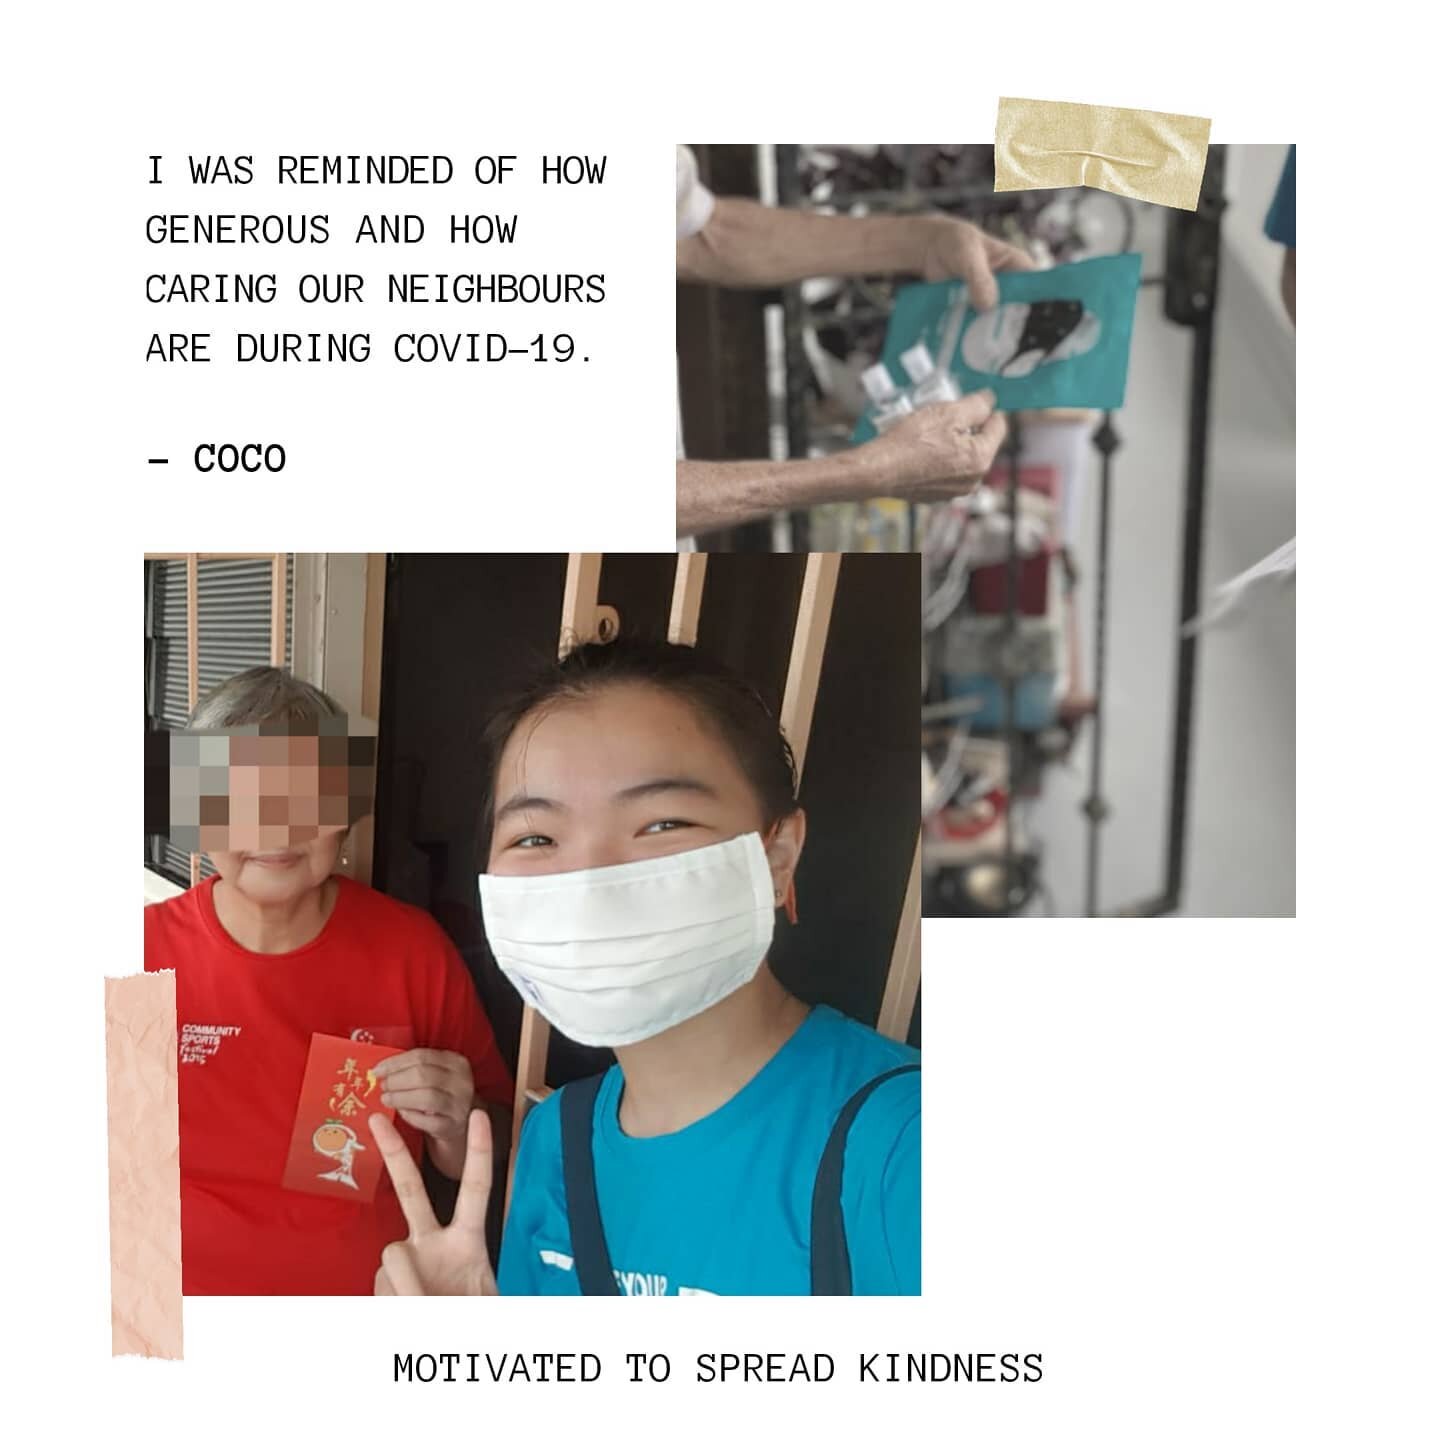 &quot;I was reminded of how generous and how caring our neightbours are during COVID-19. My neighbours would inform each other about the collection of masks and how each other are during hard times. Some households are also thoughtful and would place